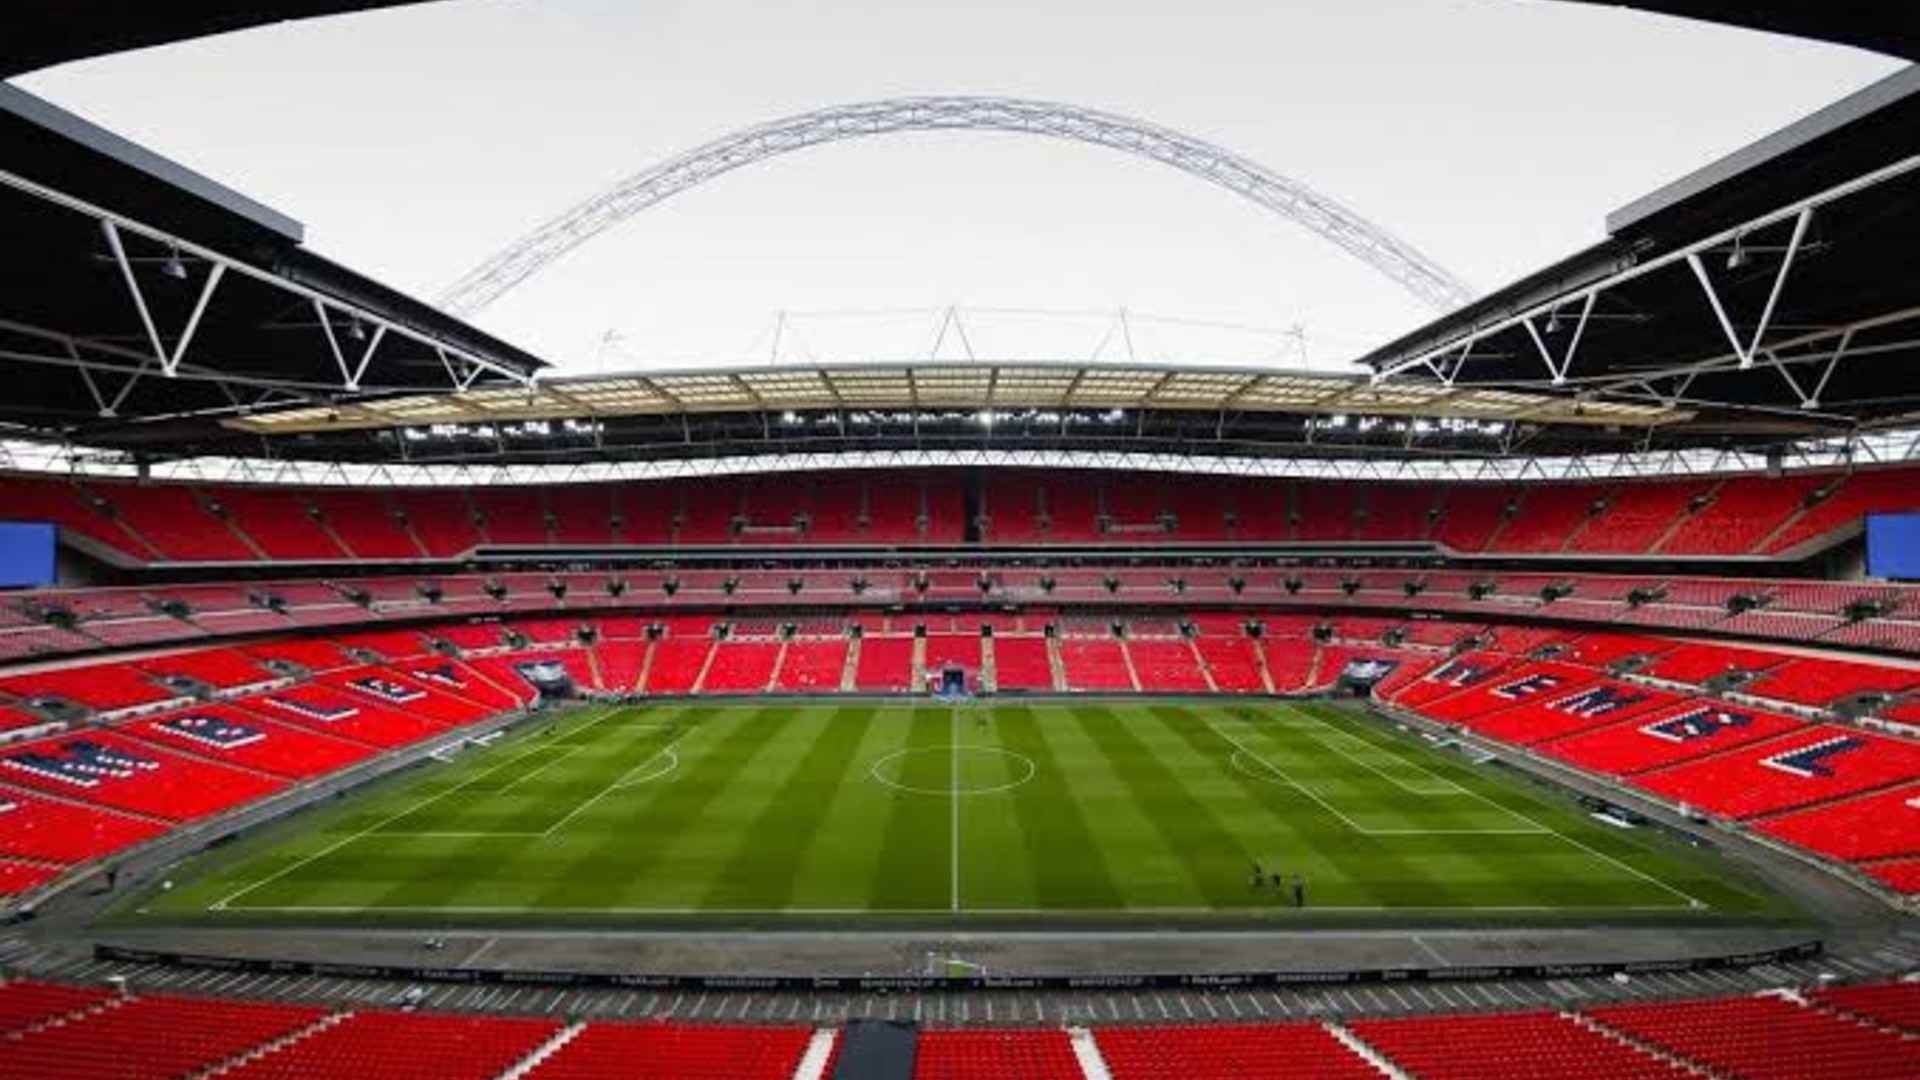 View from a private box at Wembley Stadium